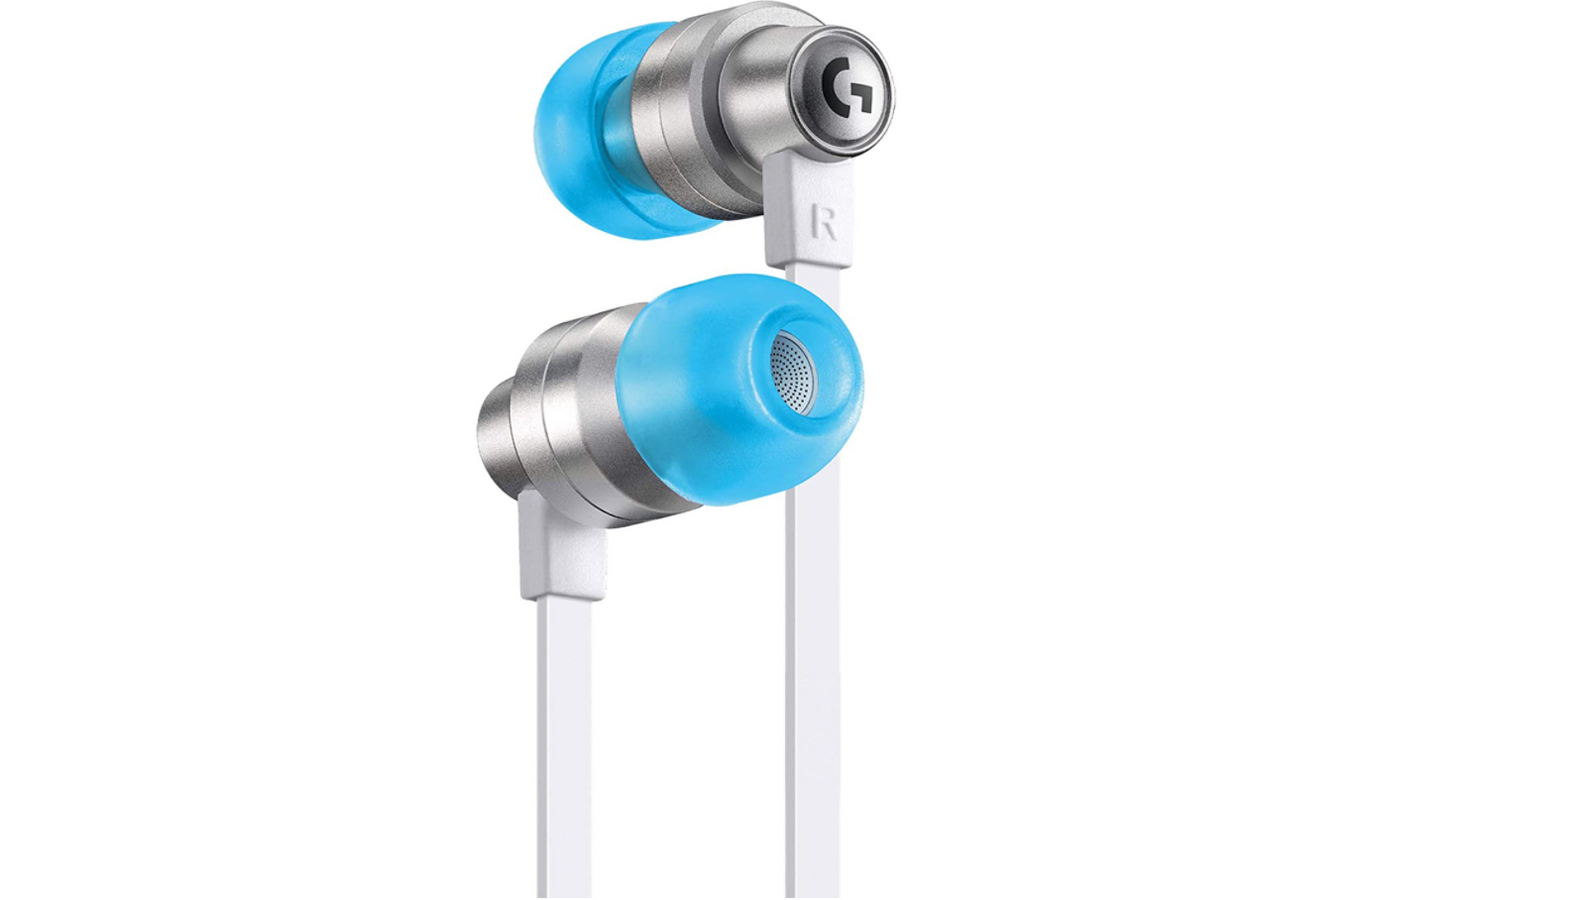 best Oculus Quest 2 accessories, product image of a pair of blue and white earphones